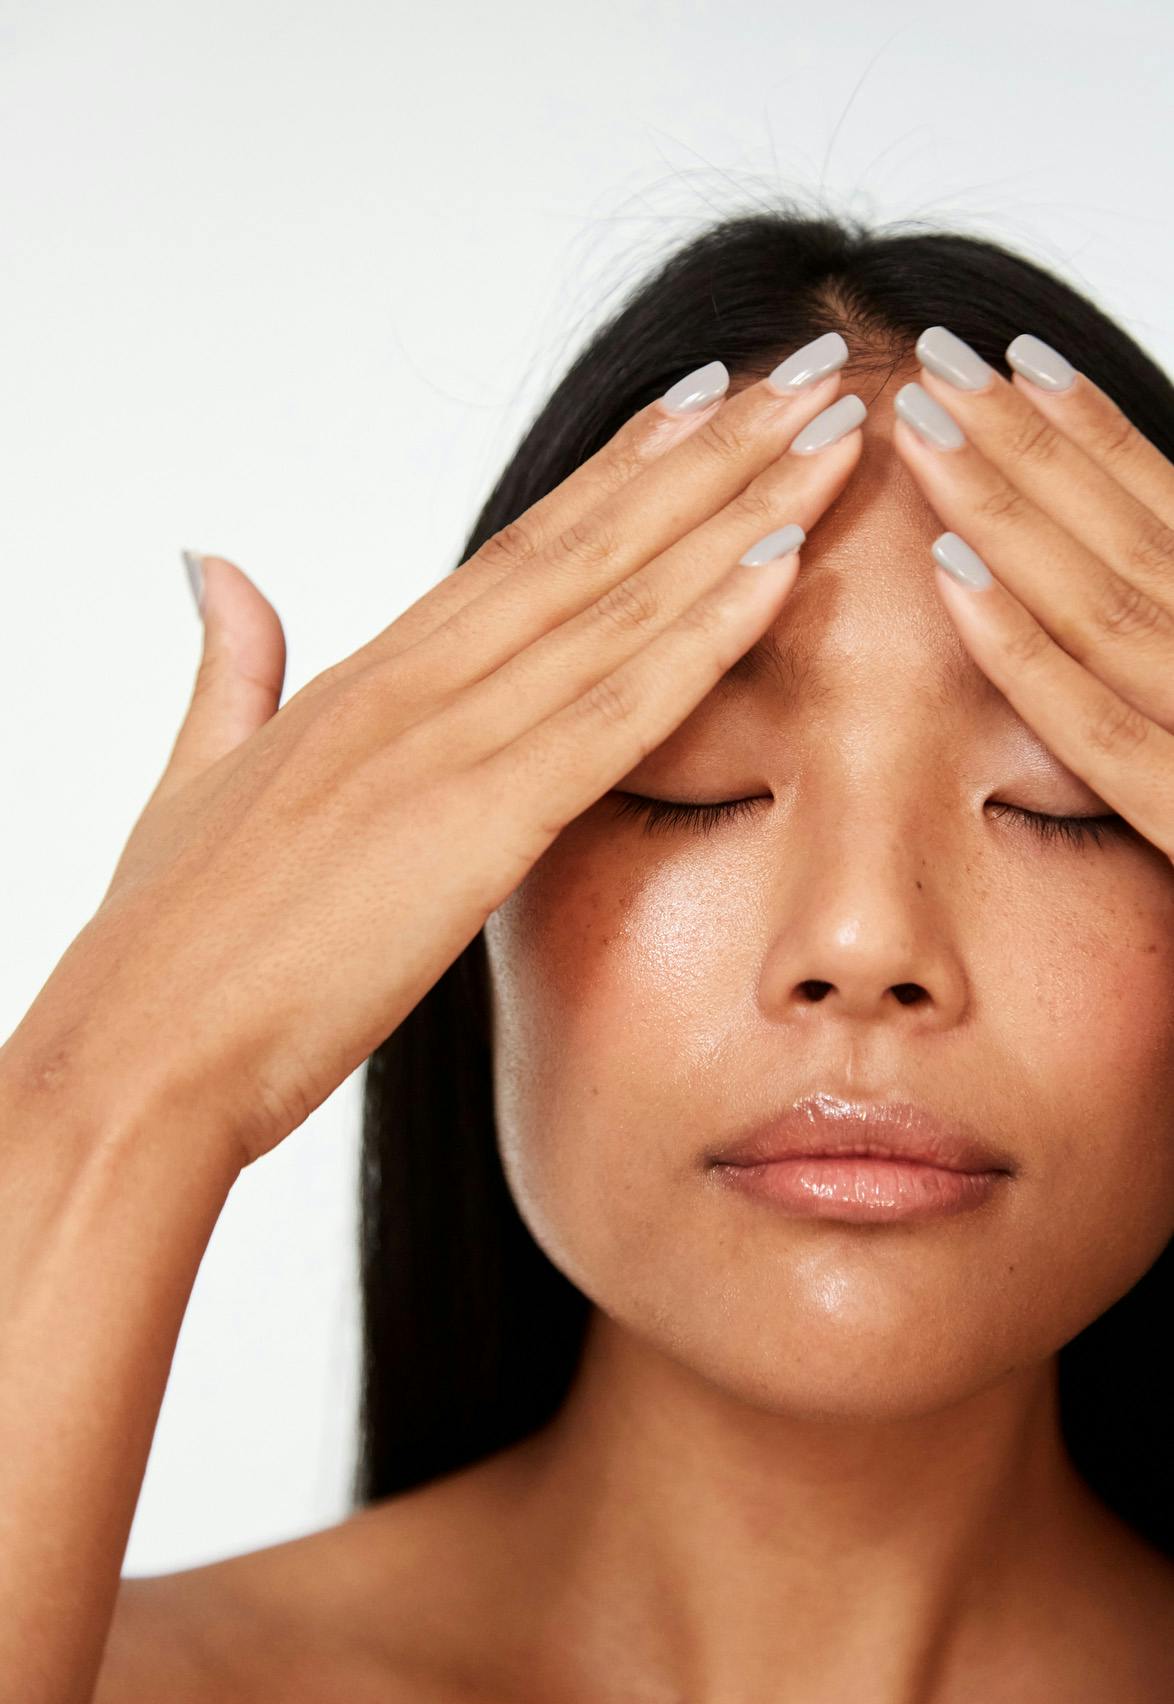 Close-up of Asian woman with her eyes closed. Both her hands are on her forehead.